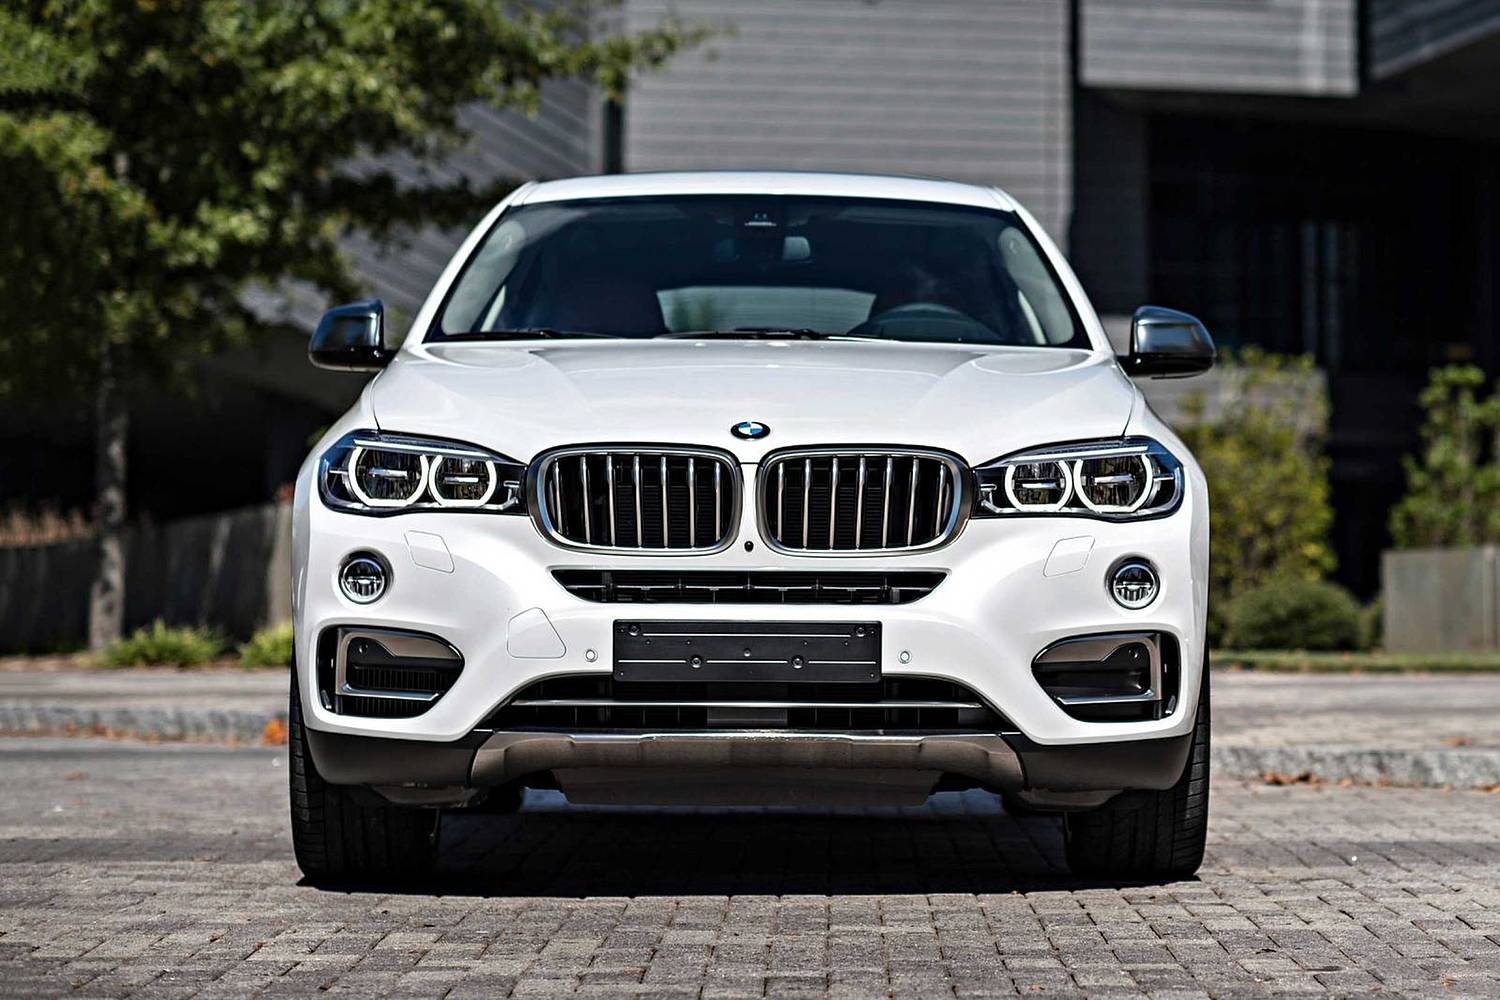 BMW X6 xDrive50i 4dr SUV Exterior (2017 model year shown)